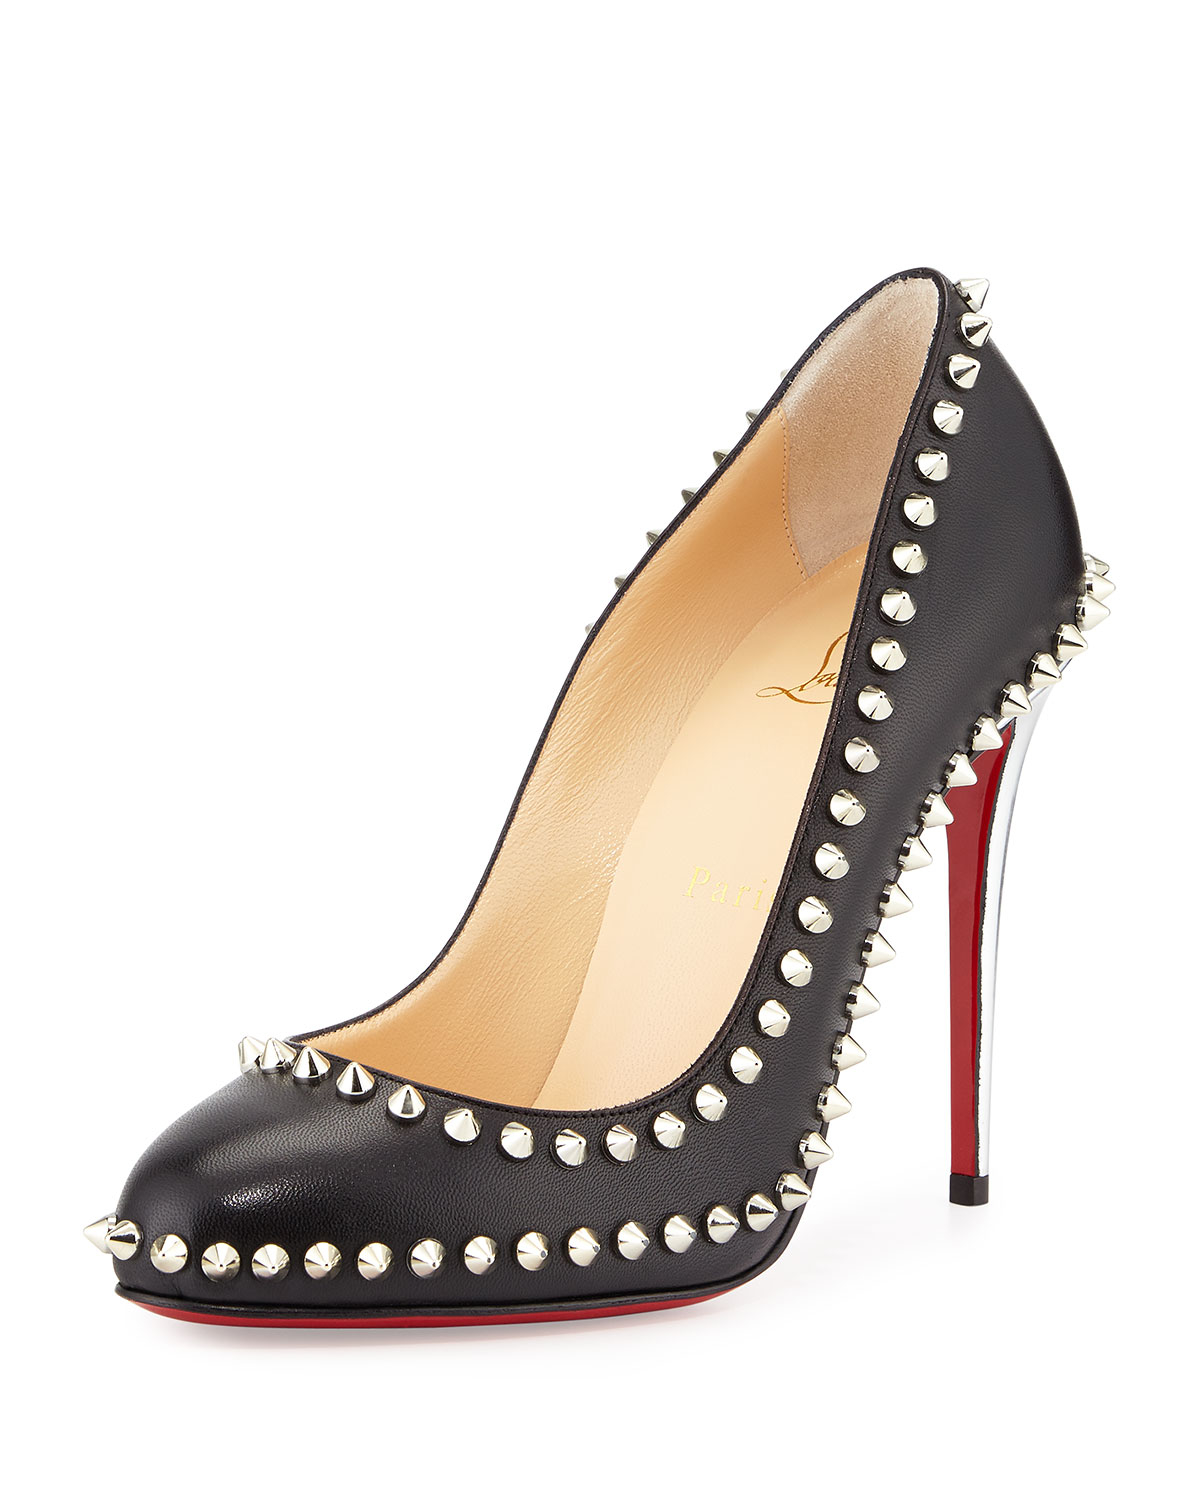 Christian louboutin Dora Studded Leather Pumps in Black | Lyst